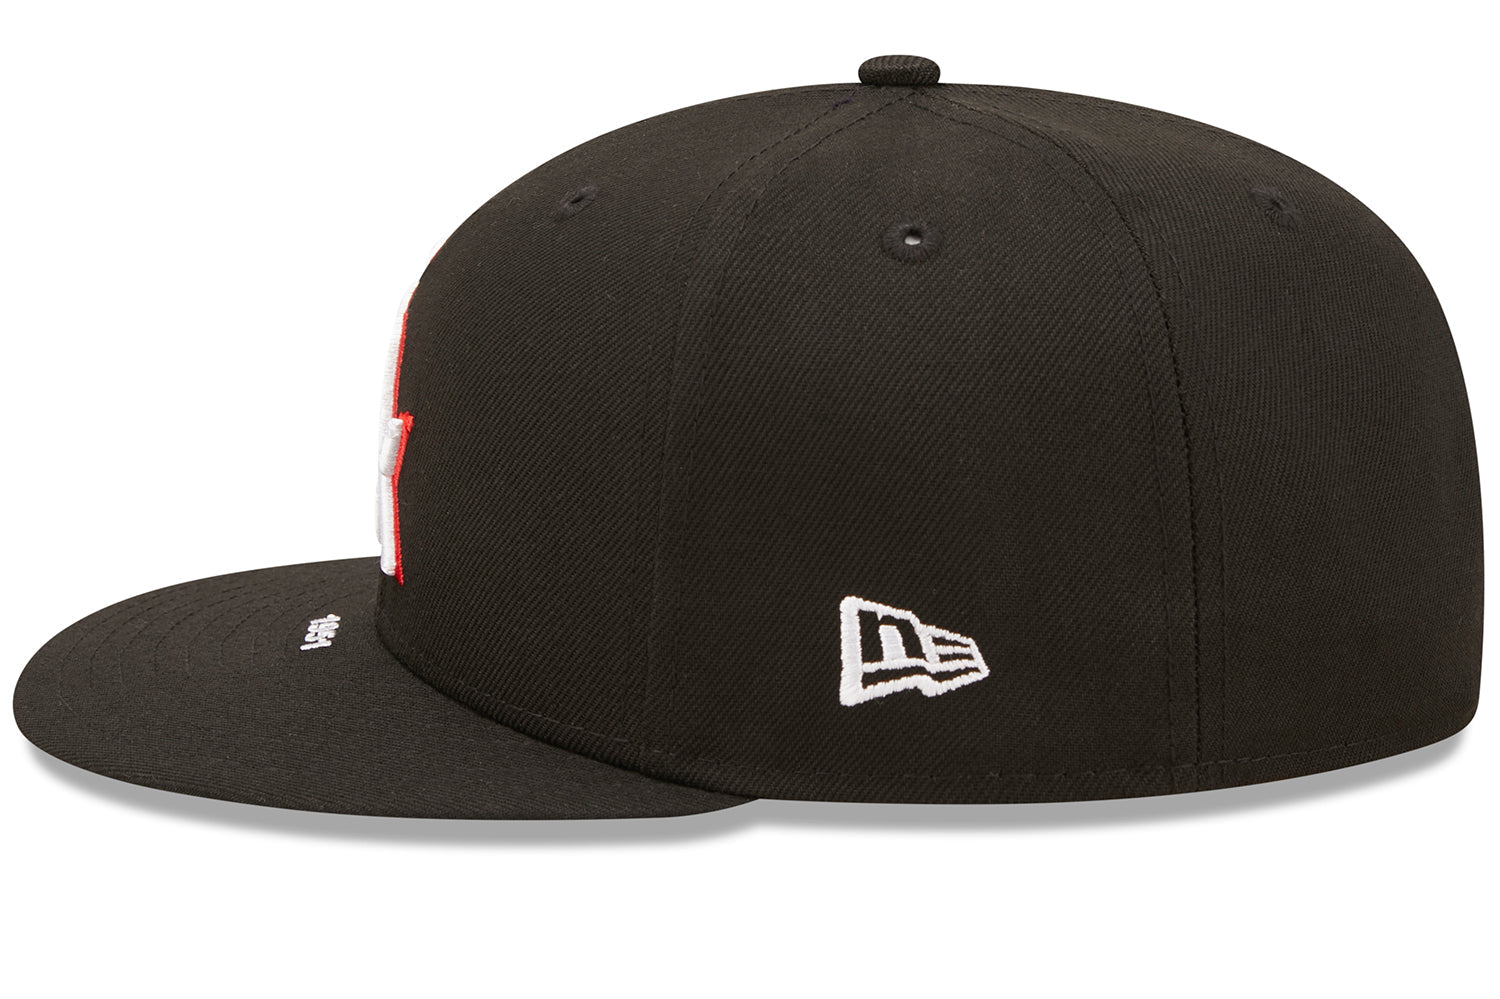 MLB 1951 59Fifty Fitted Hat Collection by MLB x New Era